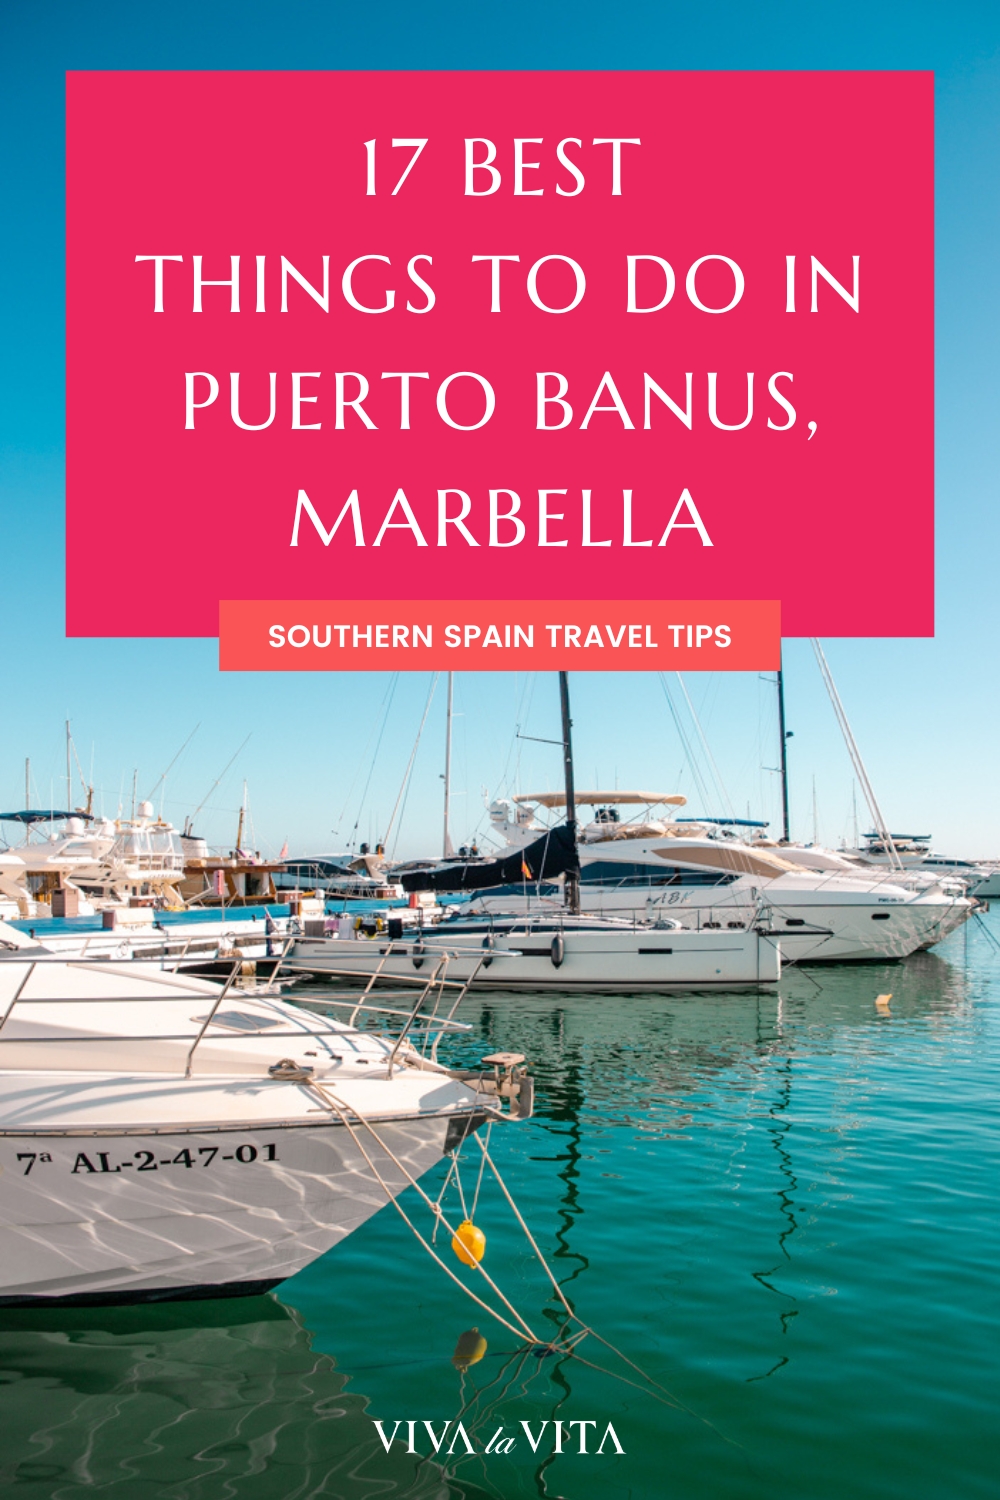 pin image for an article about best things to do in puerto banus, marbella